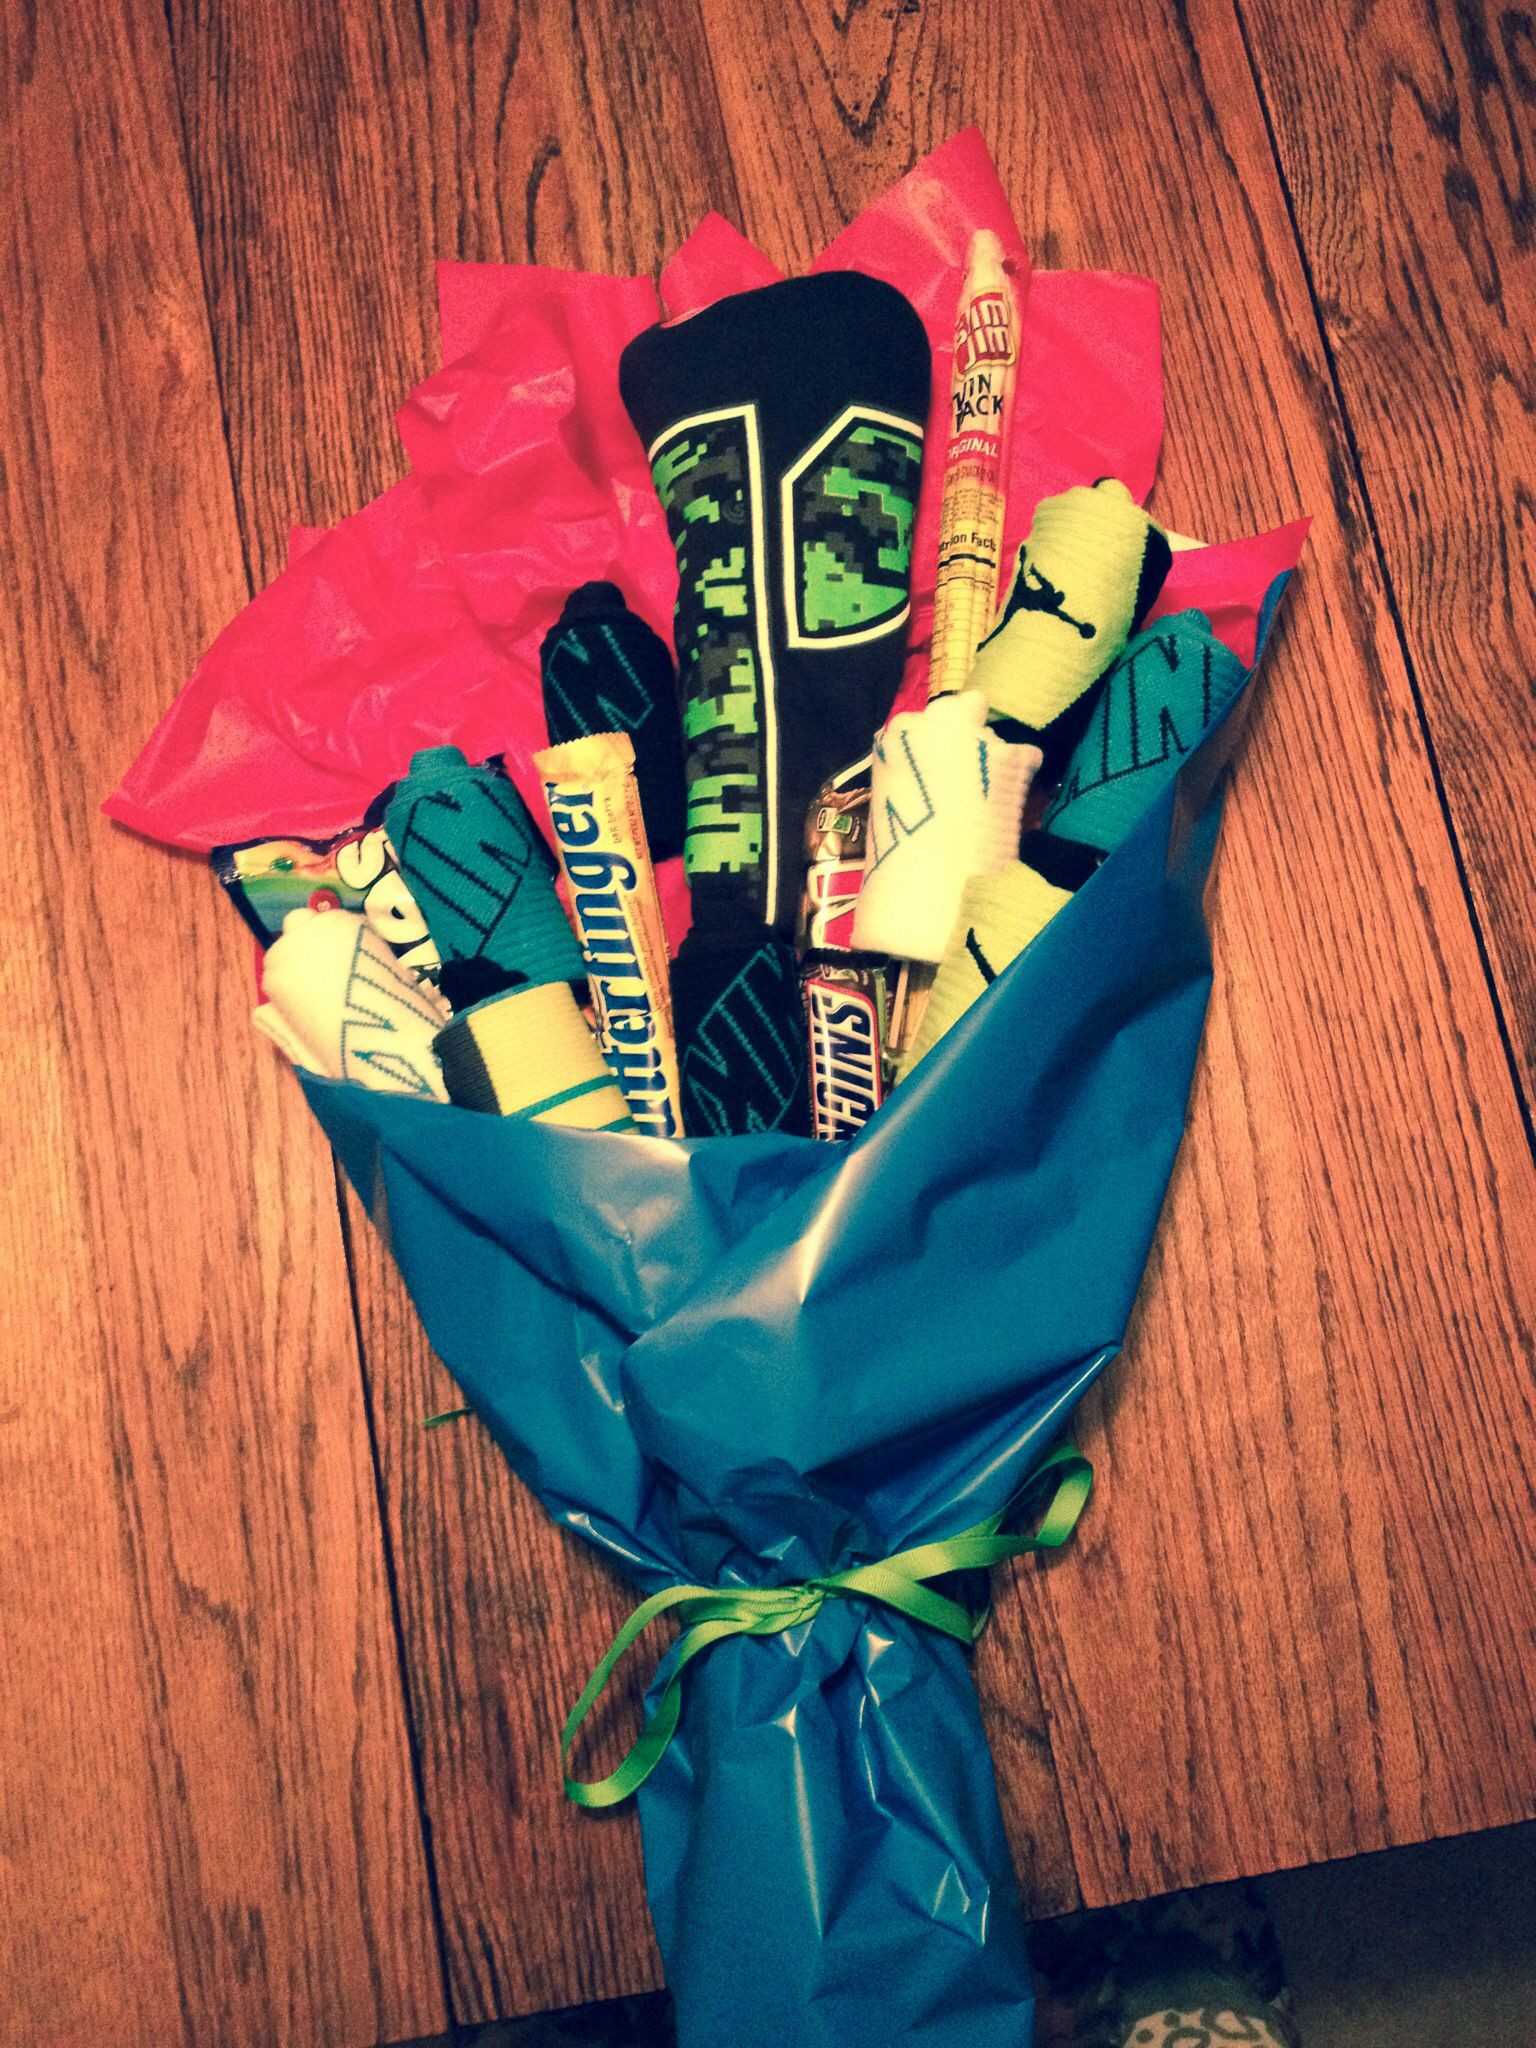 Valentine Gift Ideas For 16 Year Old Boyfriend
 Nike elite socks bouquet for my 12 year old with treats